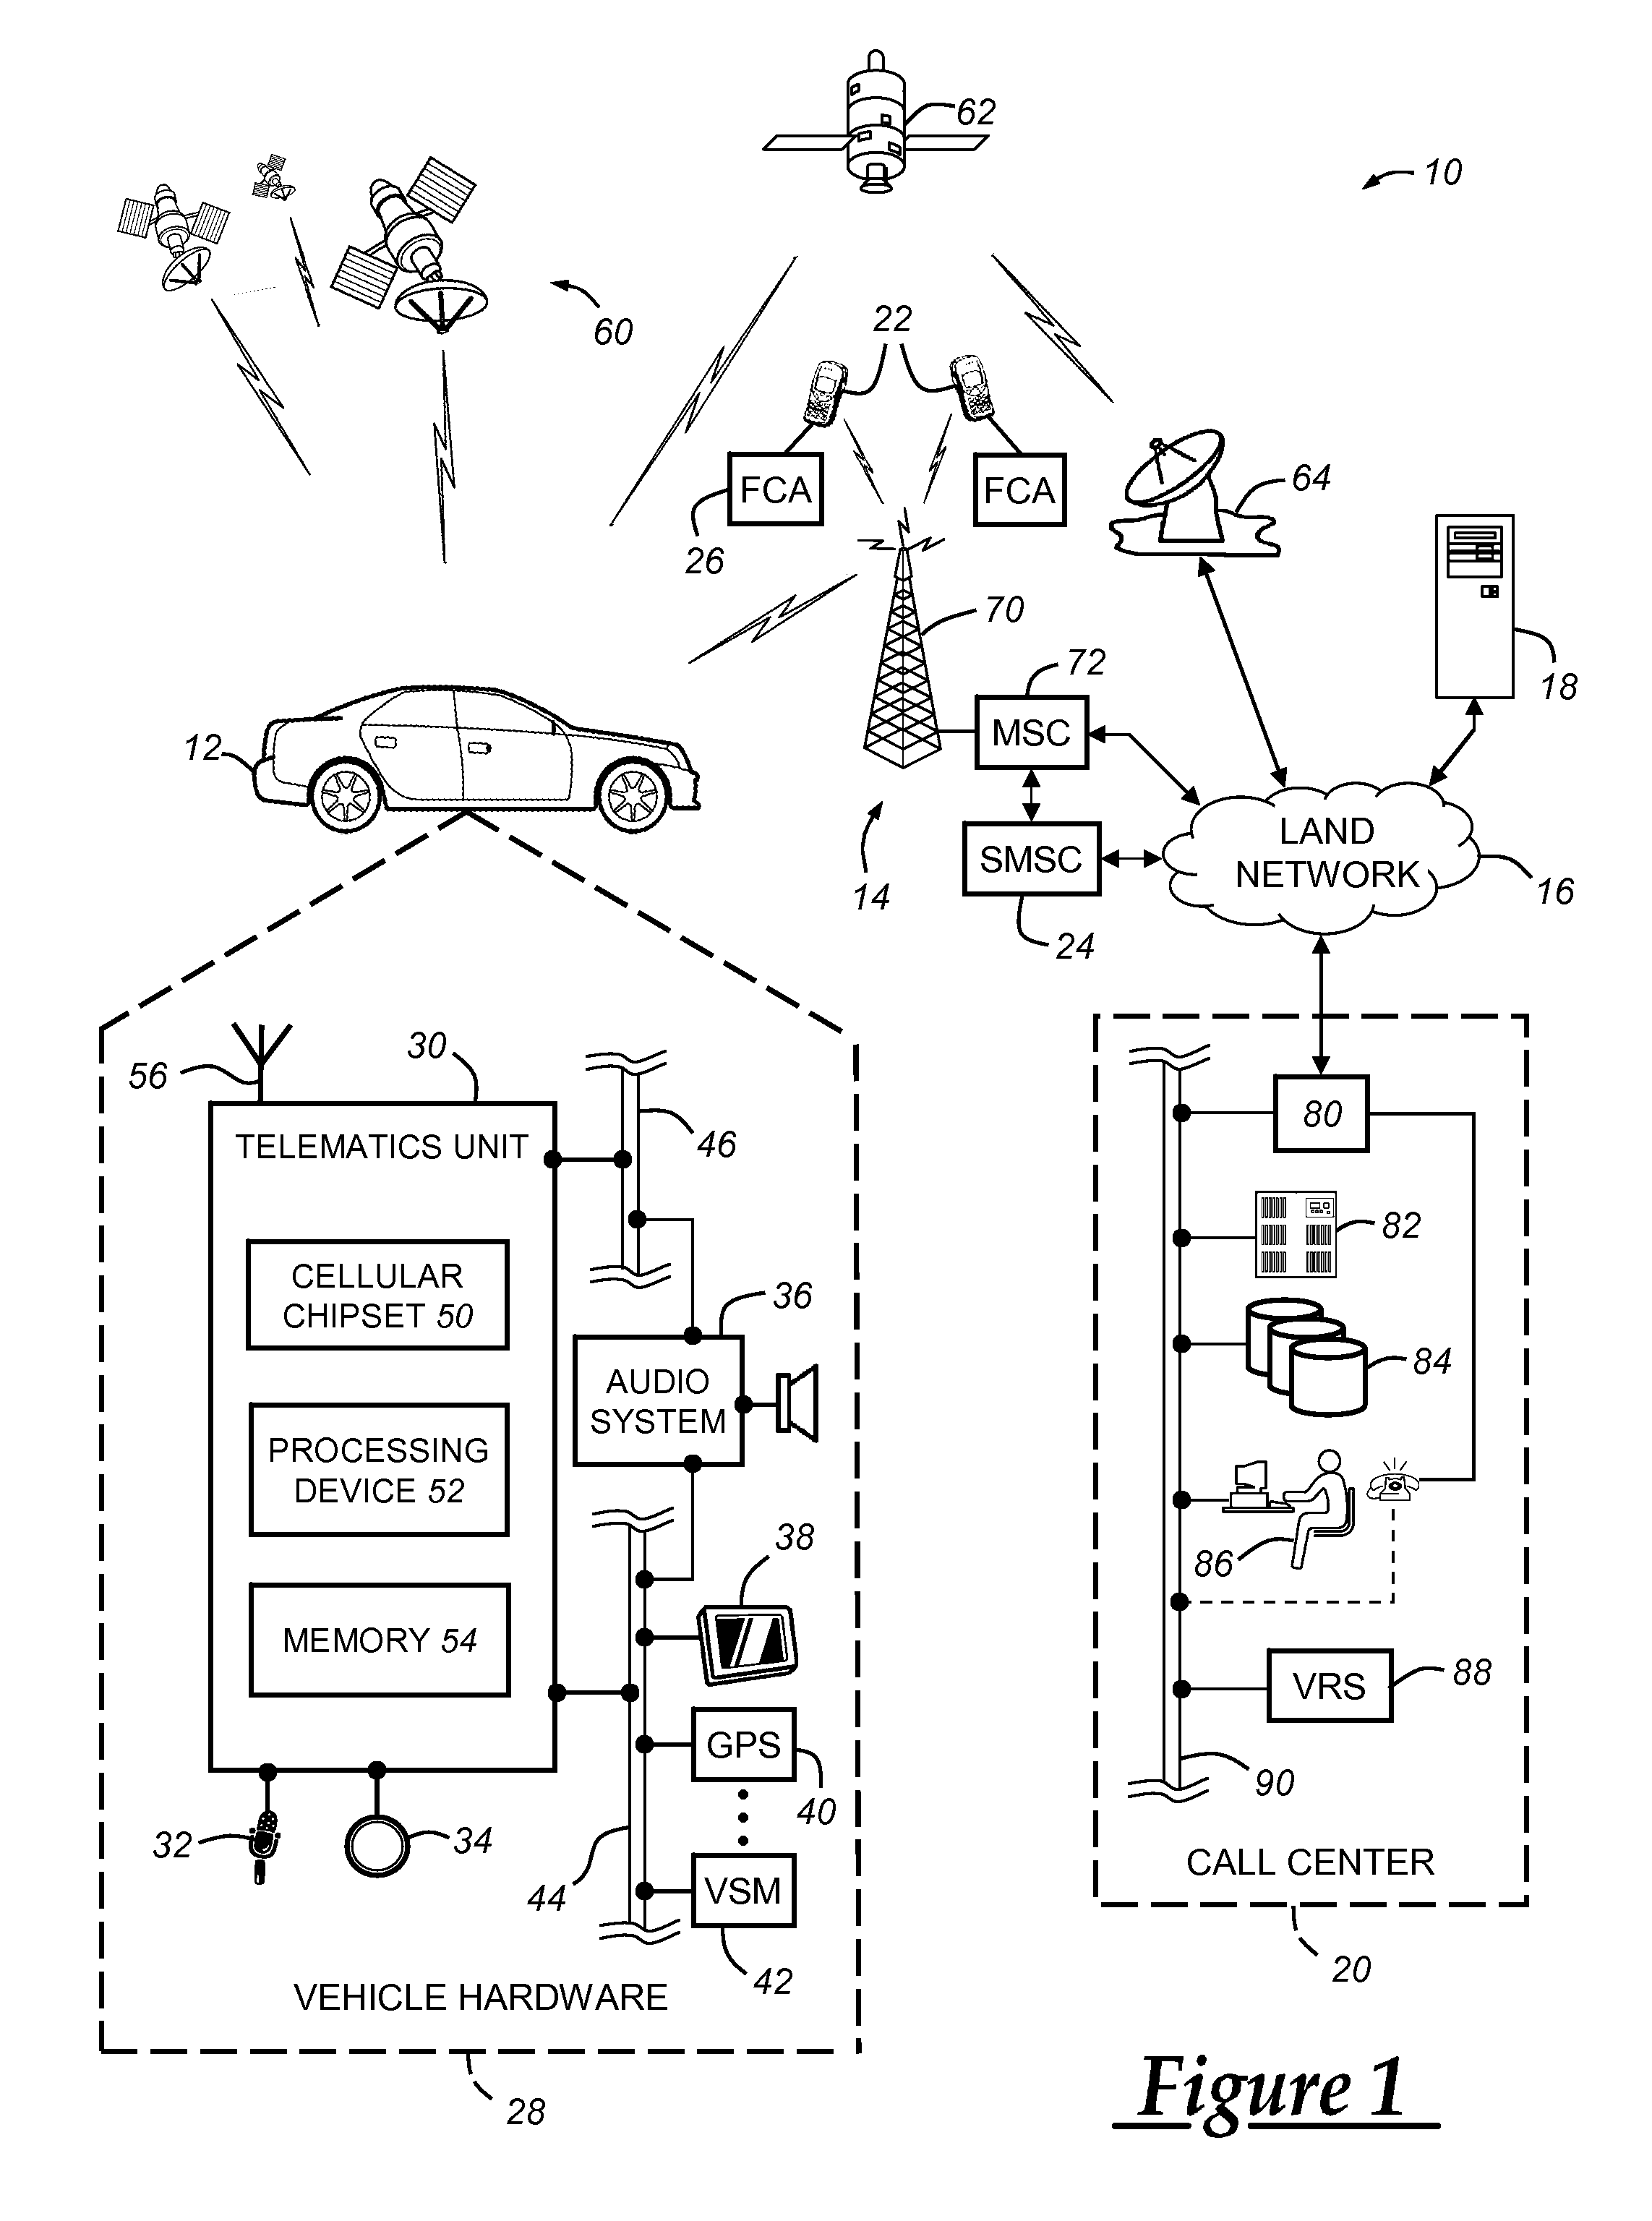 Method for remotely controlling vehicle features